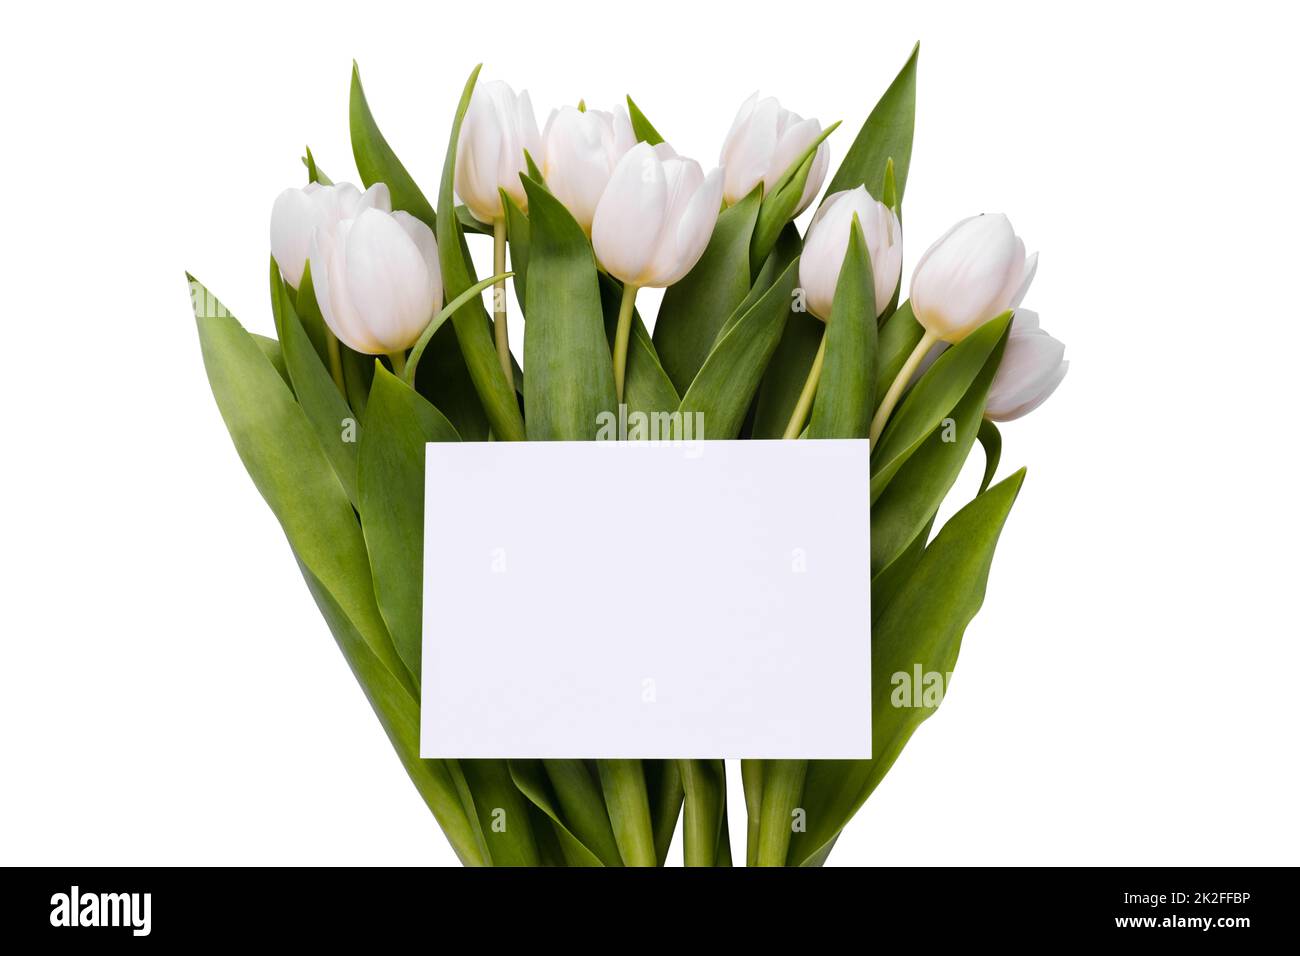 Simple greeting card template with tulips bouquet on white background Stock Photo